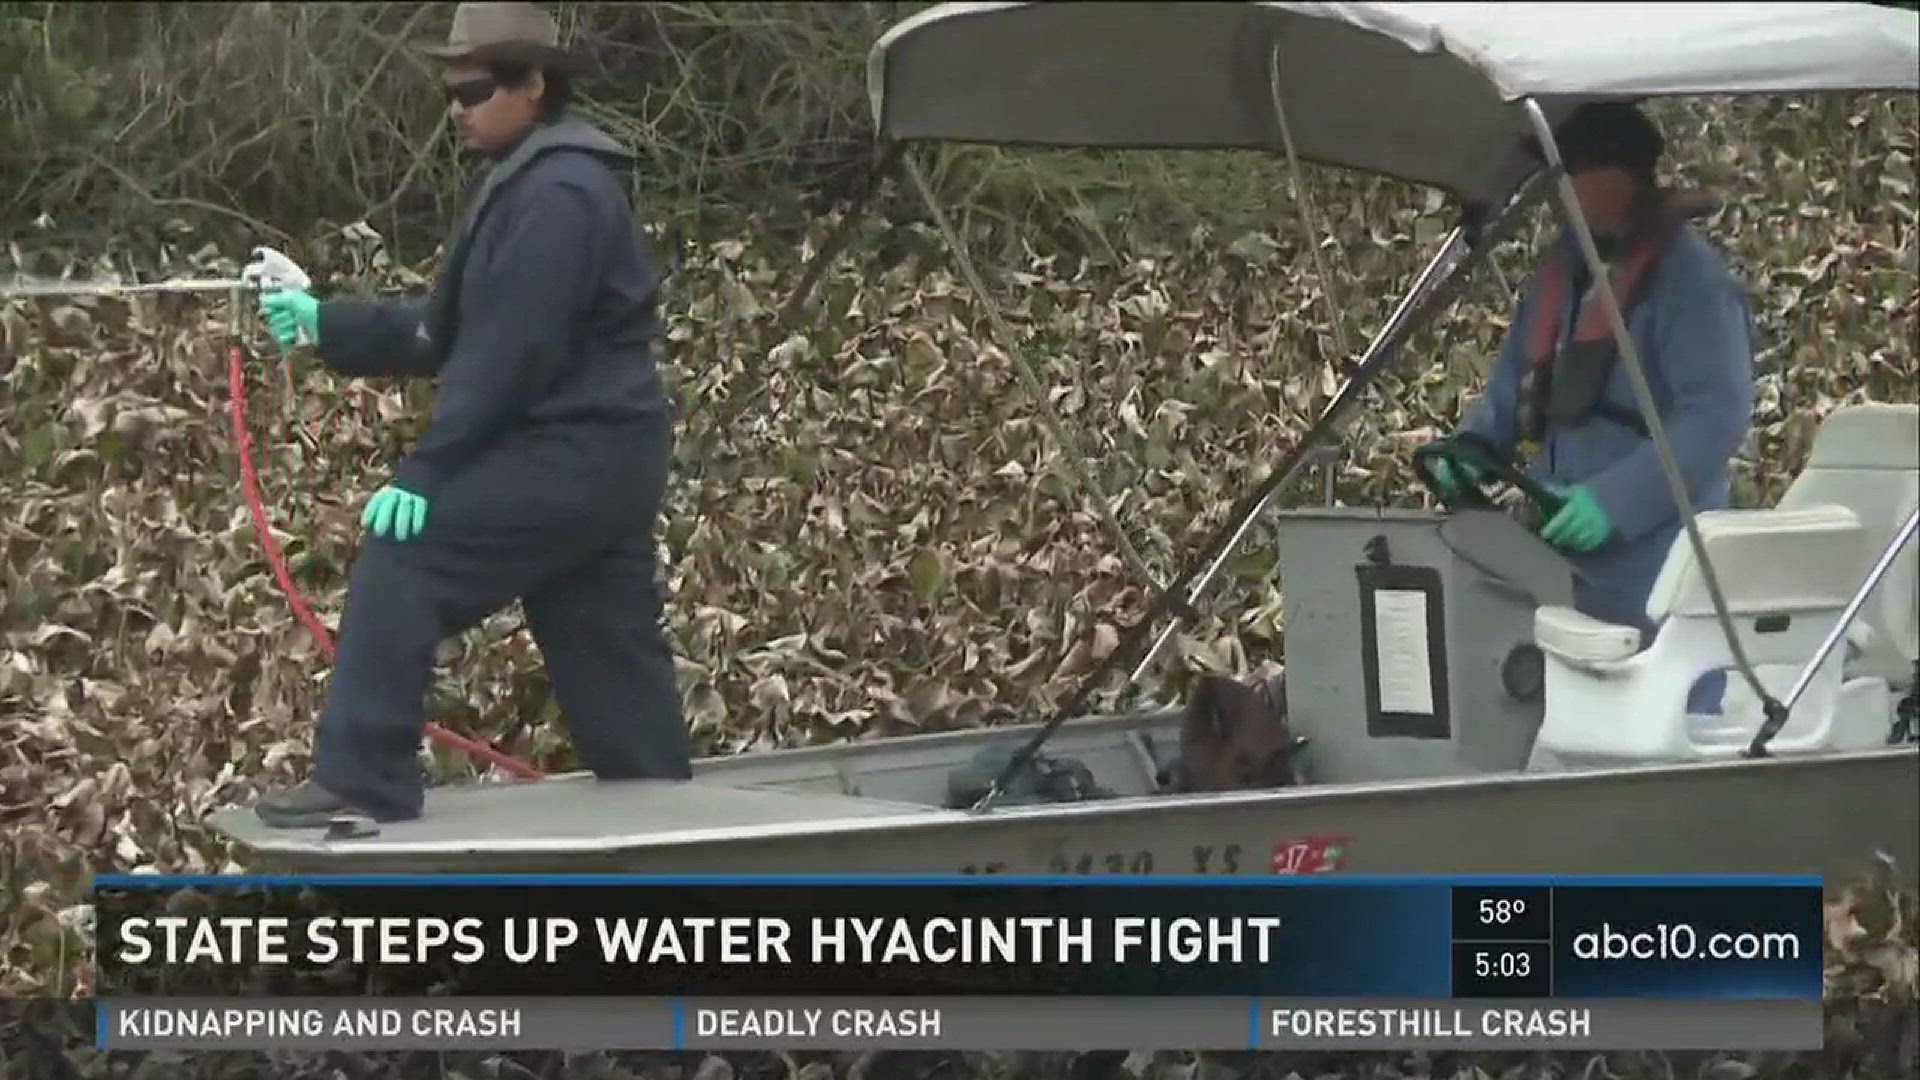 State steps up water hyacinth fight